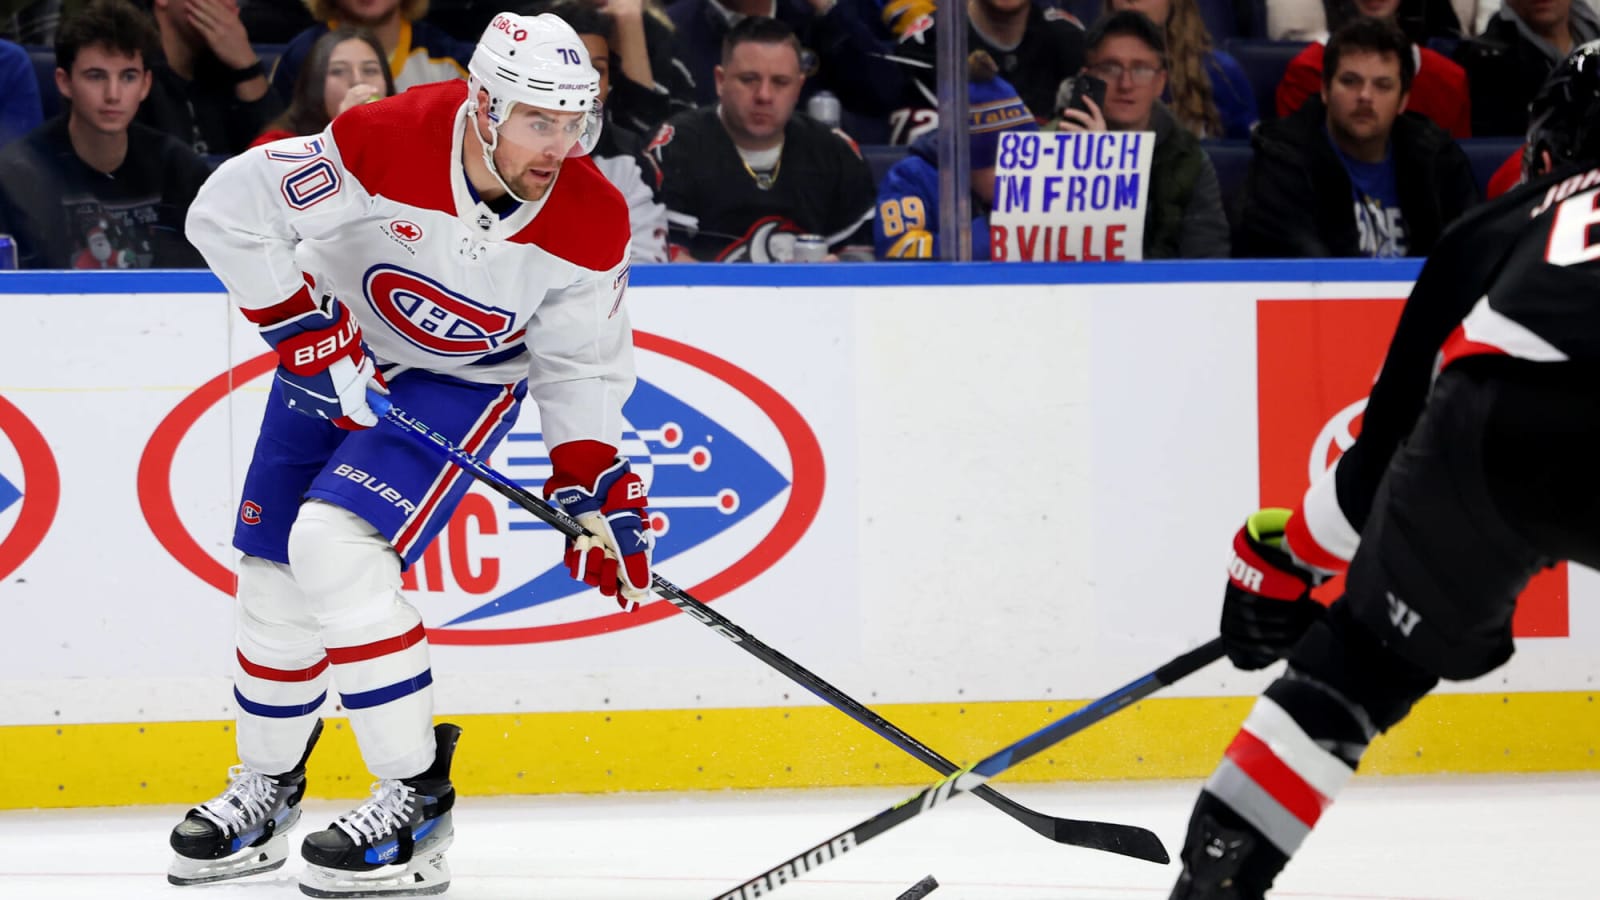 Montreal Canadiens’ Tanner Pearson exits game against Buffalo with upper-body injury